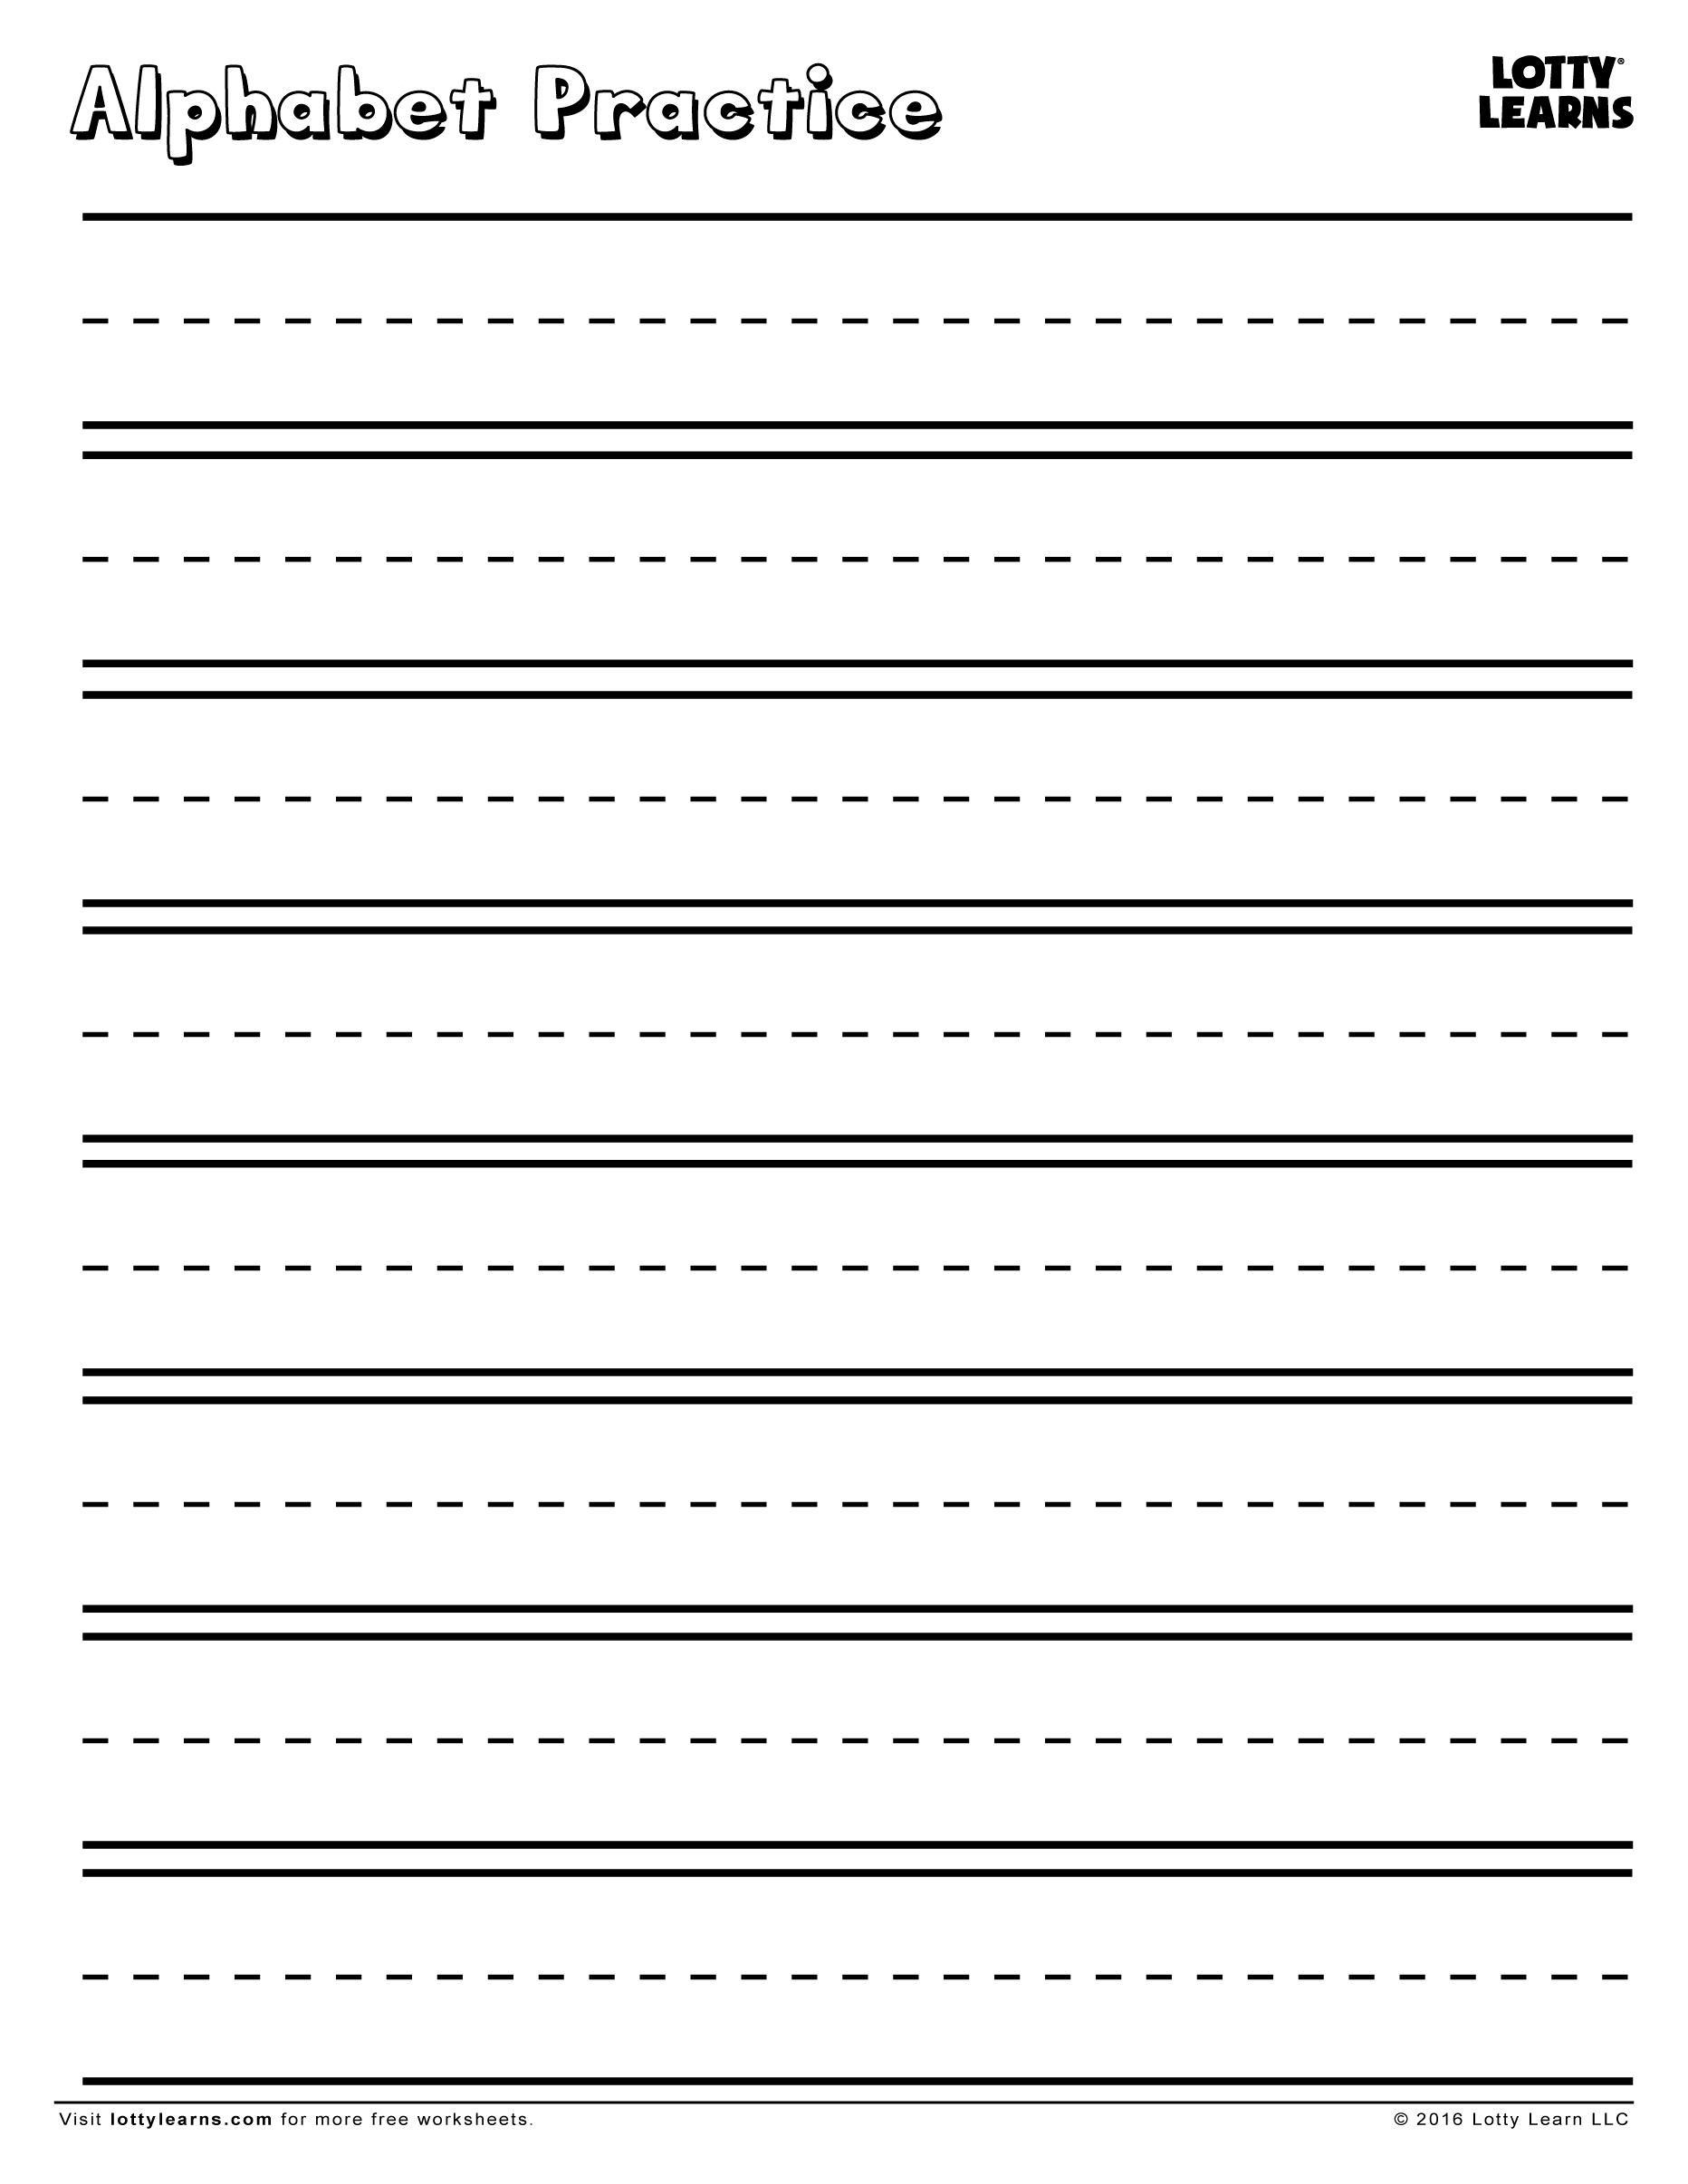 Practice Makes Perfect! Blank Alphabet Practice Sheet | Lotty Learns - Blank Handwriting Worksheets Printable Free